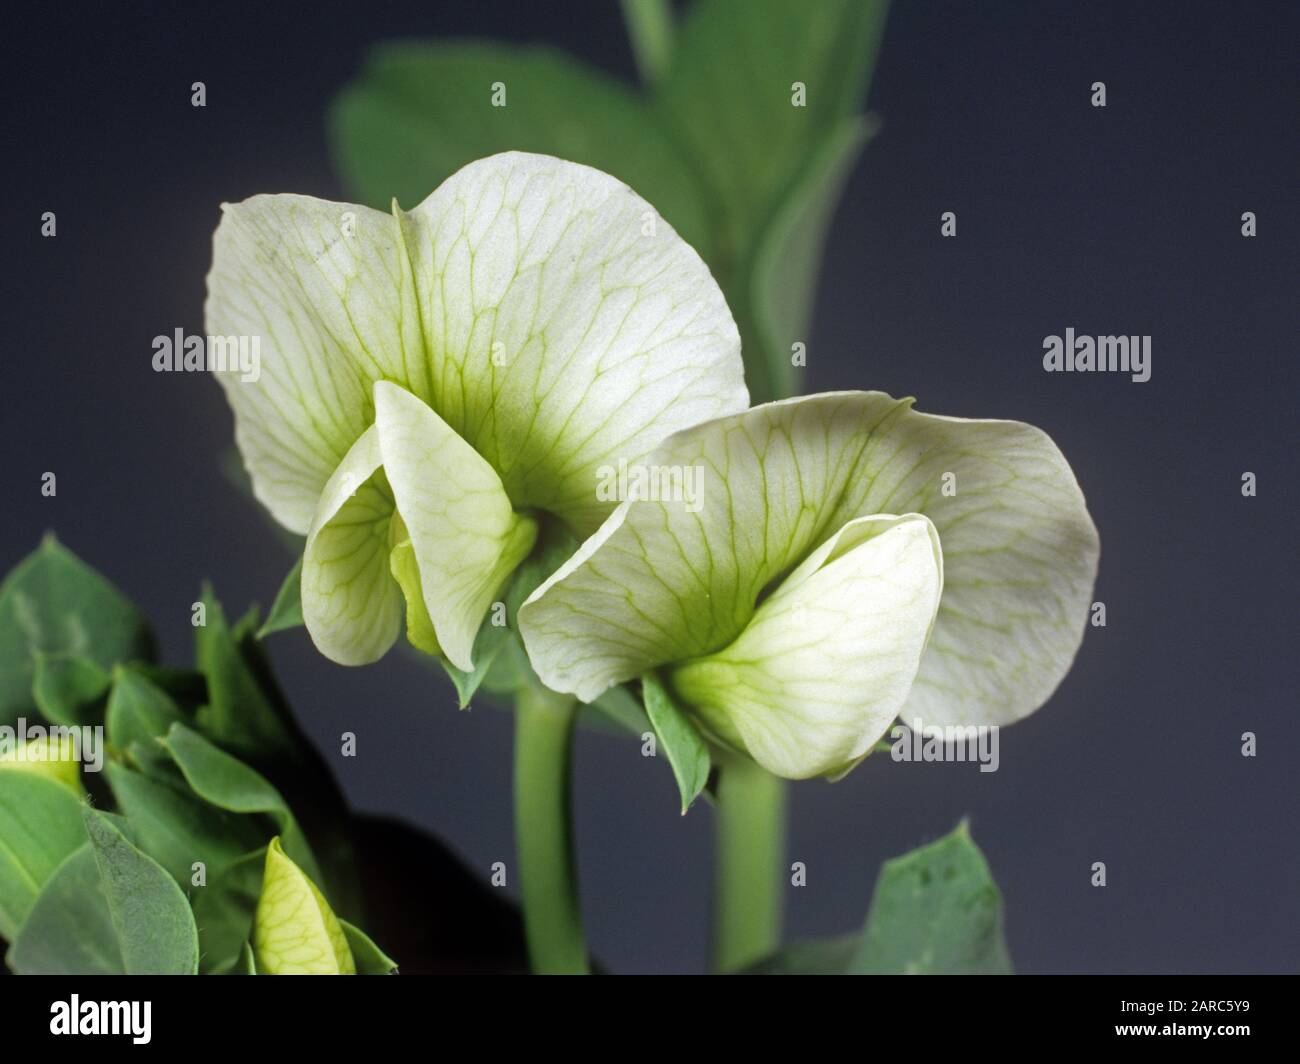 Leaves and white flower with five petals and green venation of a pea (Pisum sativum) crop plant Stock Photo